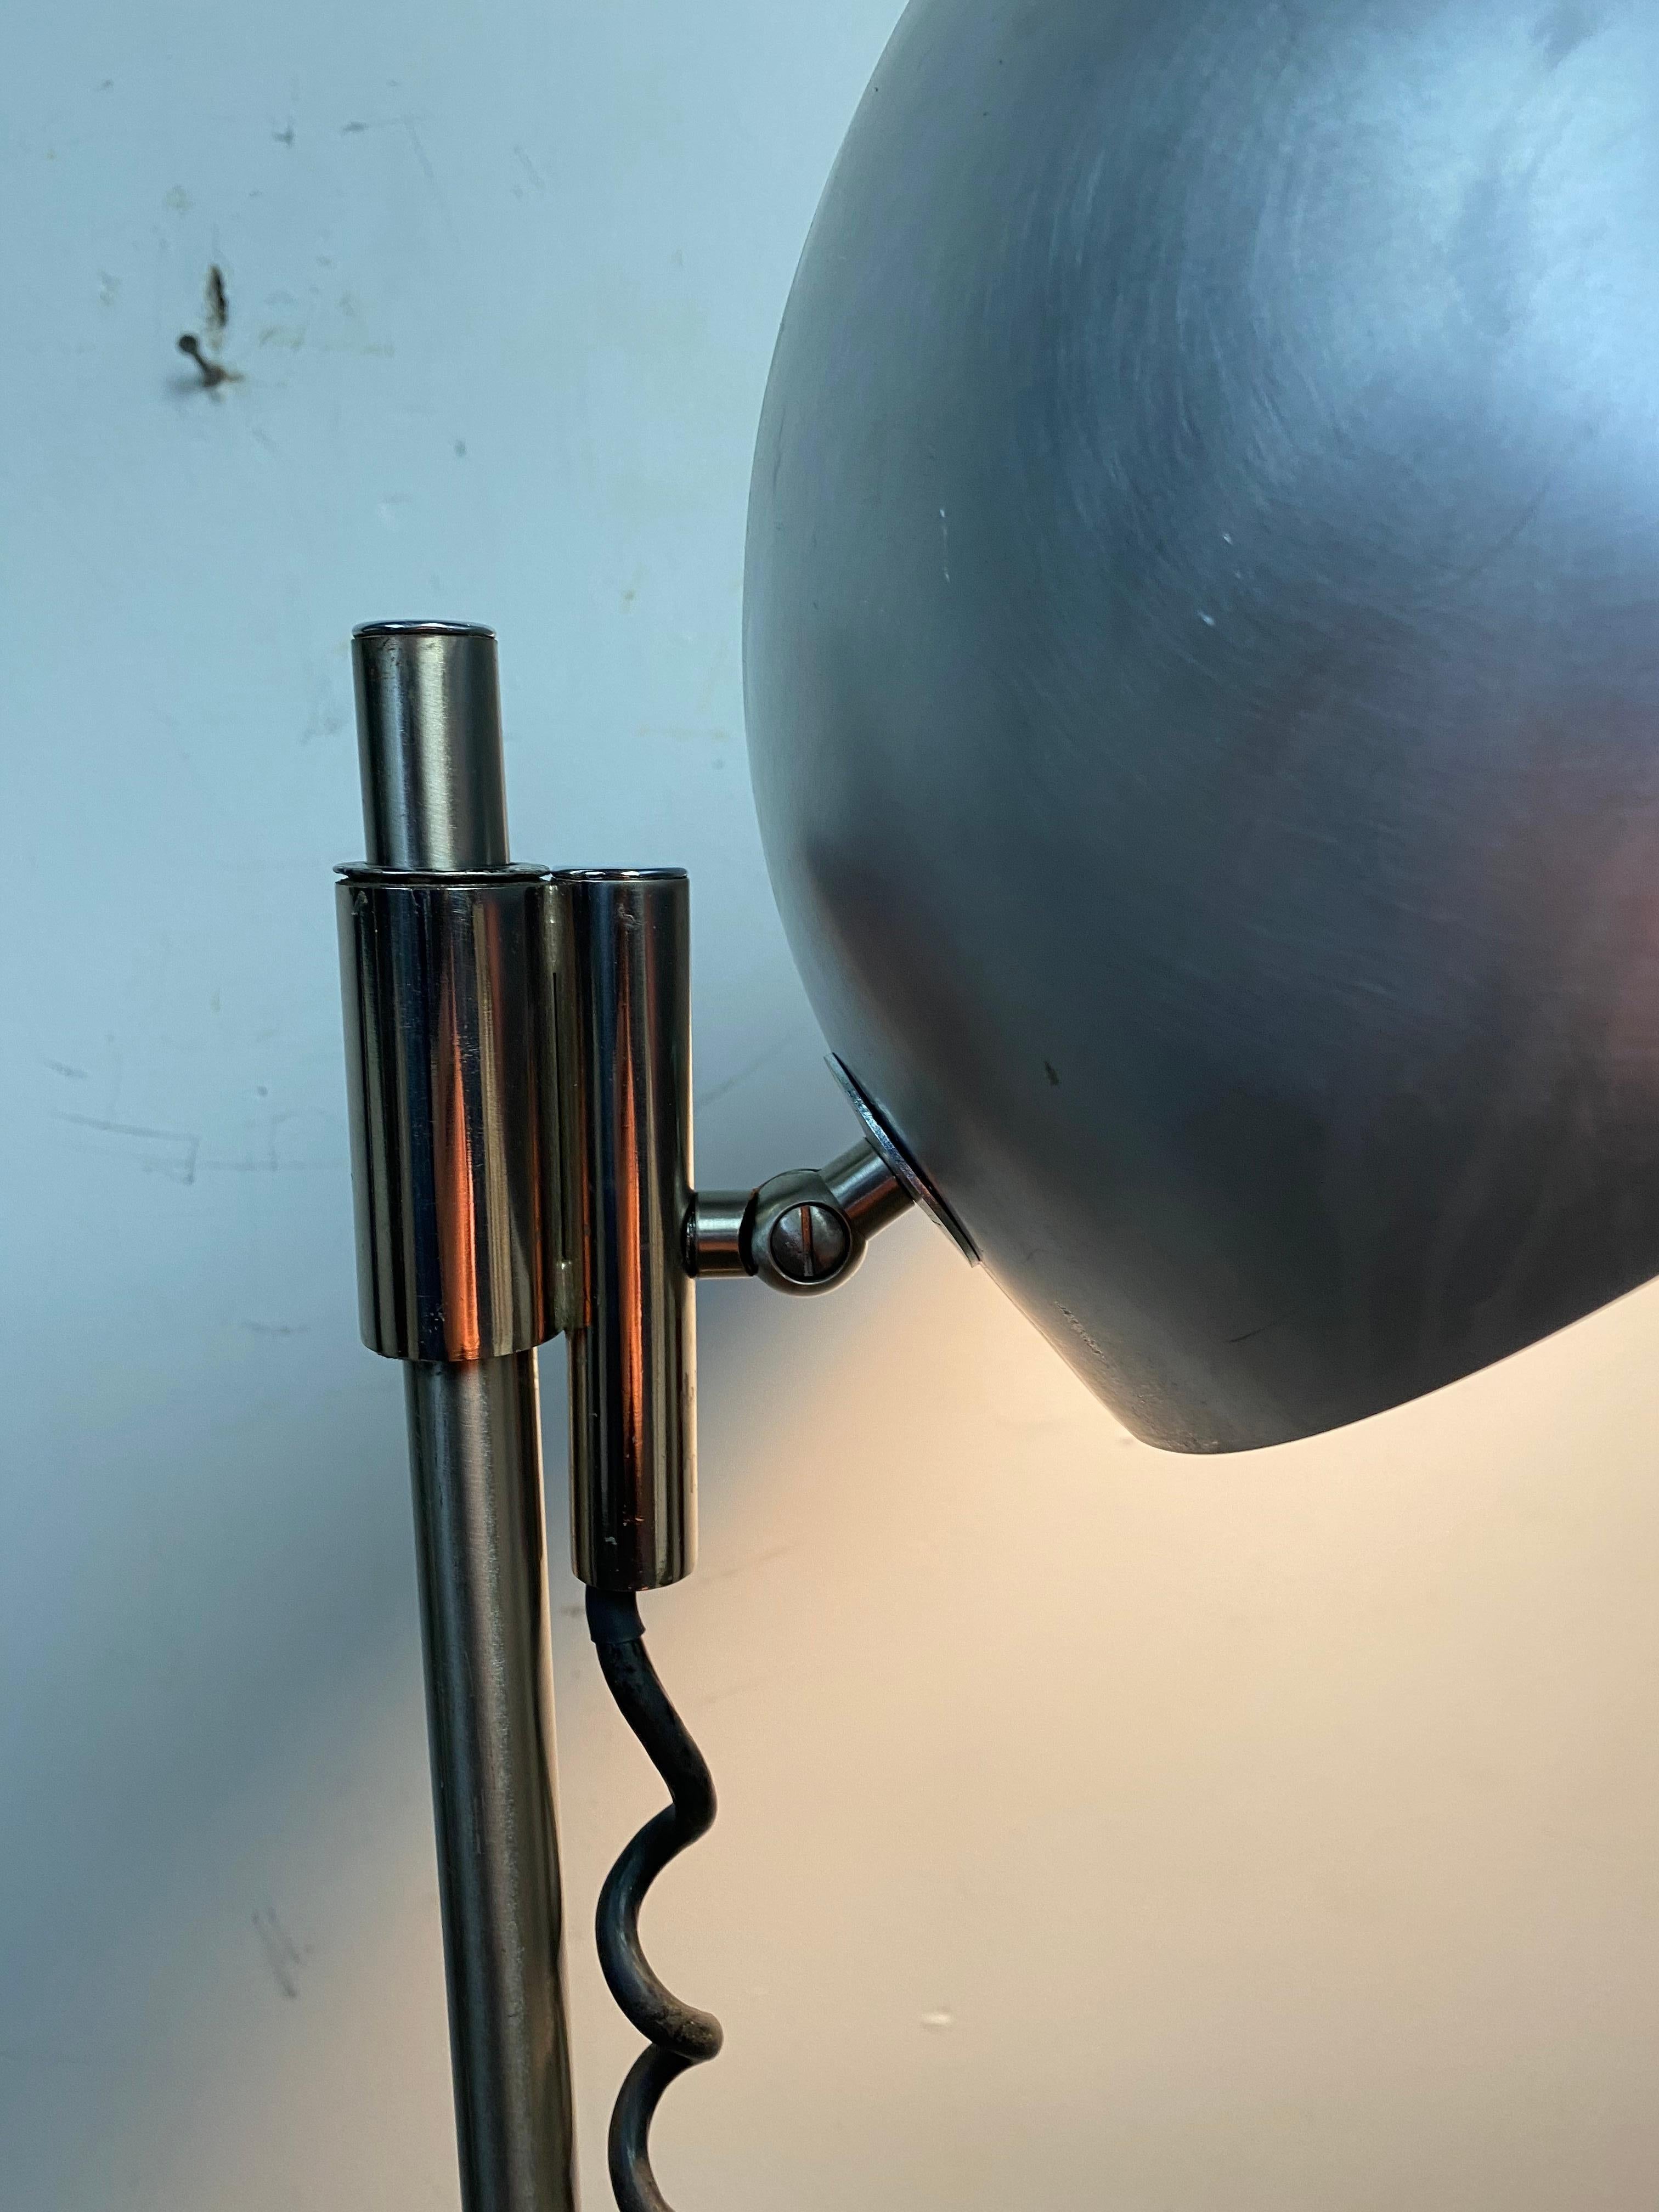 Unusual industrial Bauhaus inspired adjustable floor lamp.. German or Italian ? c.197o's..Beautiful spun aluminum dome shade, height adjustable,,Classic 1970s ..space age styling,,Fit seamlessly into any modernist, contemporary ,,eclectic